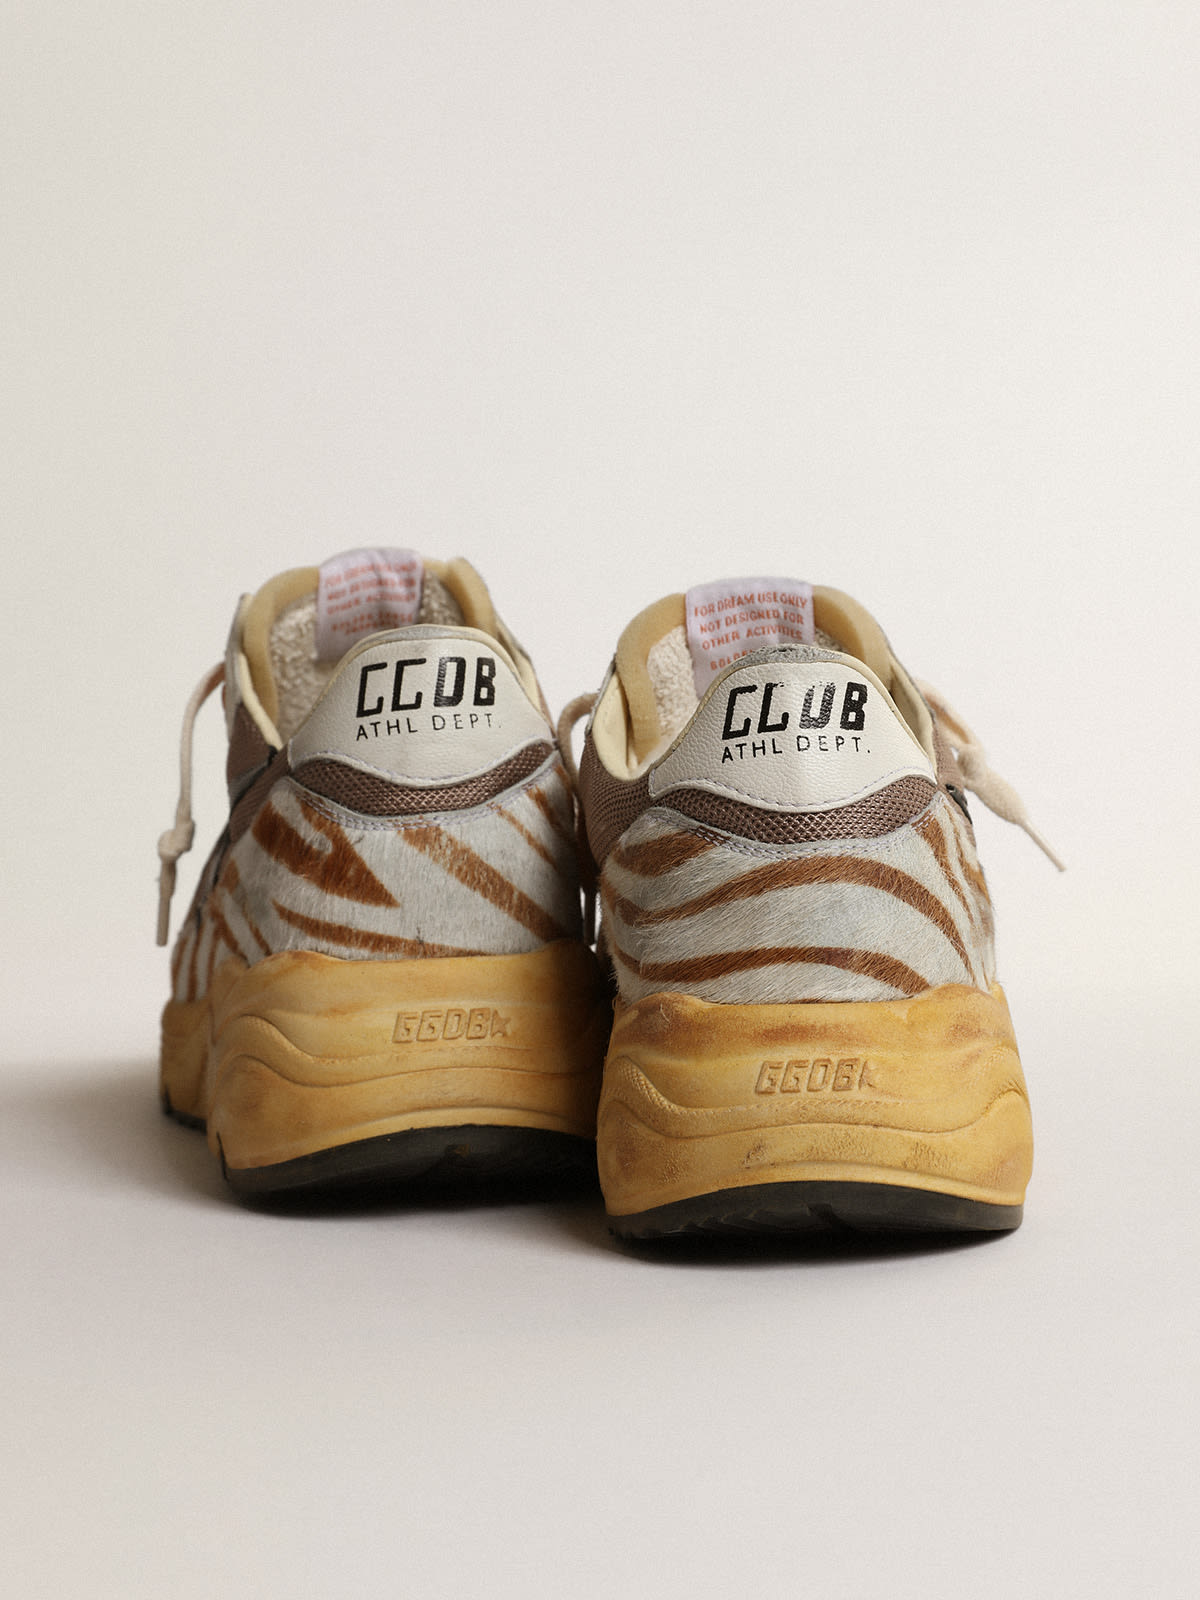 Golden Goose - Men’s Running Sole LAB in brown fabric and pony skin in 